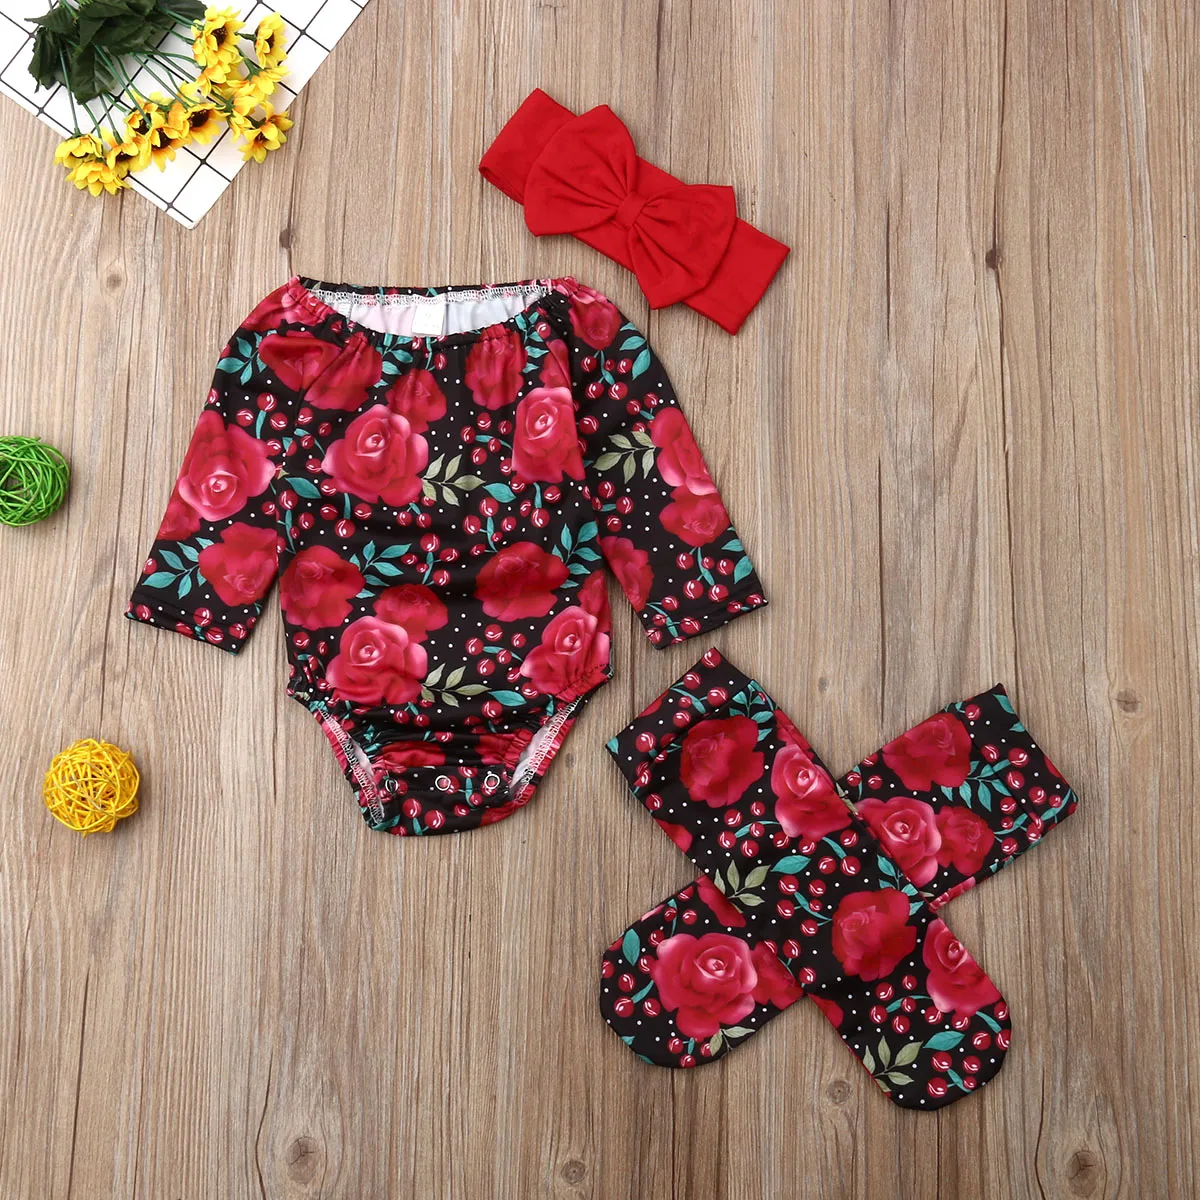 2020 New Infant Baby Girl Flower Bodysuit Jumpsuit+Socks+Headband 3Pcs Outfits Toddler Newborn Baby Girl Clothes Sets